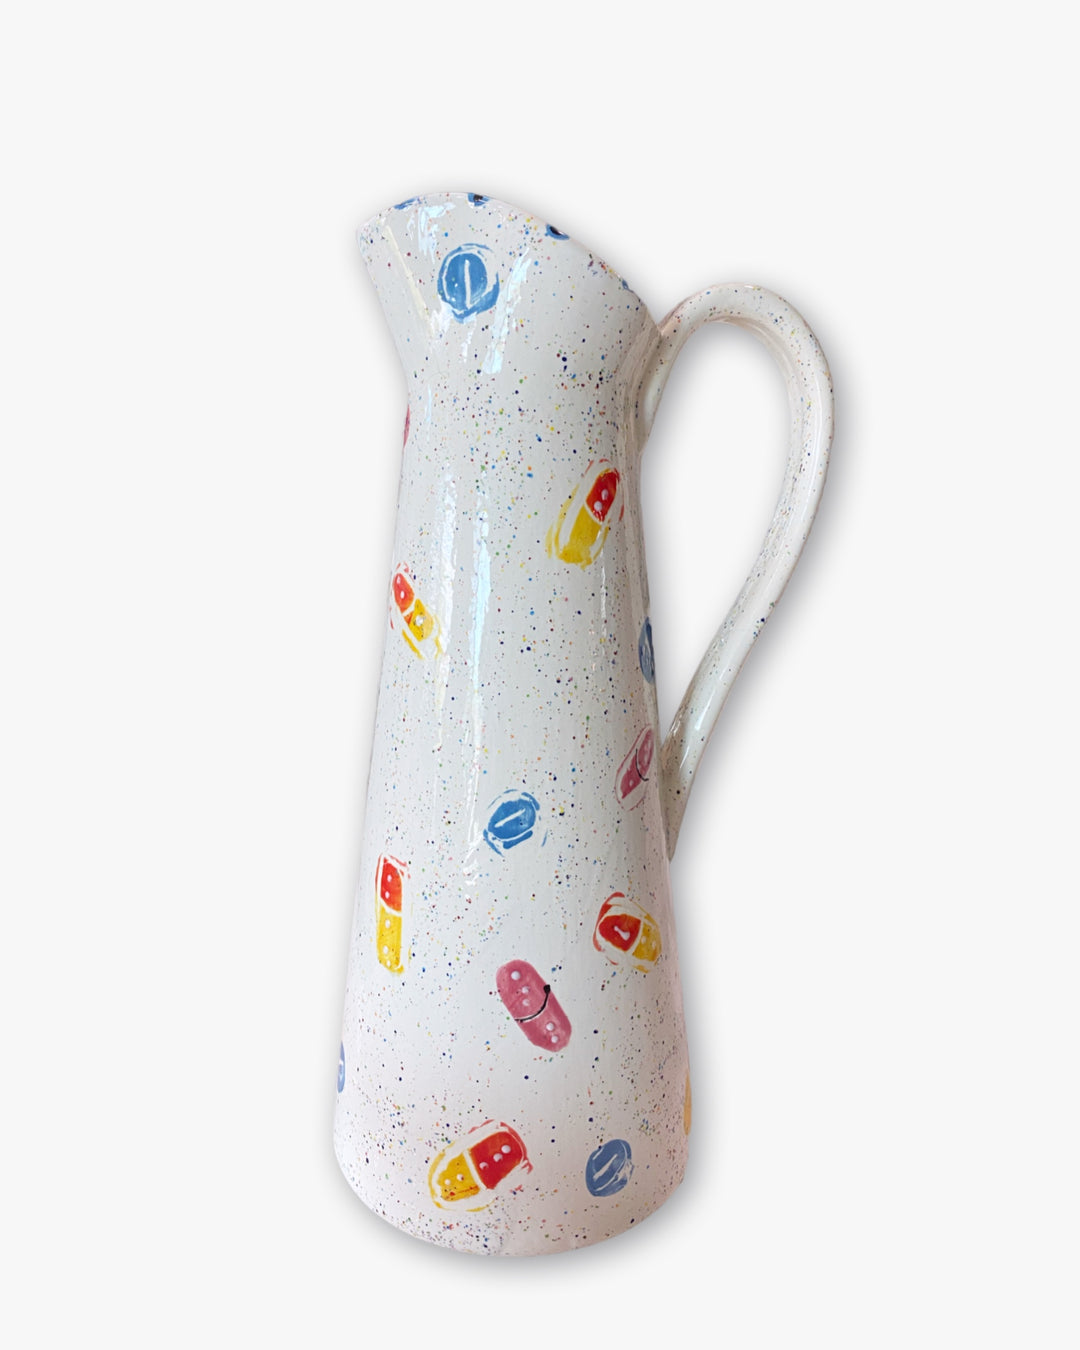 I Am Filled With Glitter, Sugar & Anxiety Pitcher ( hand painted glaze )